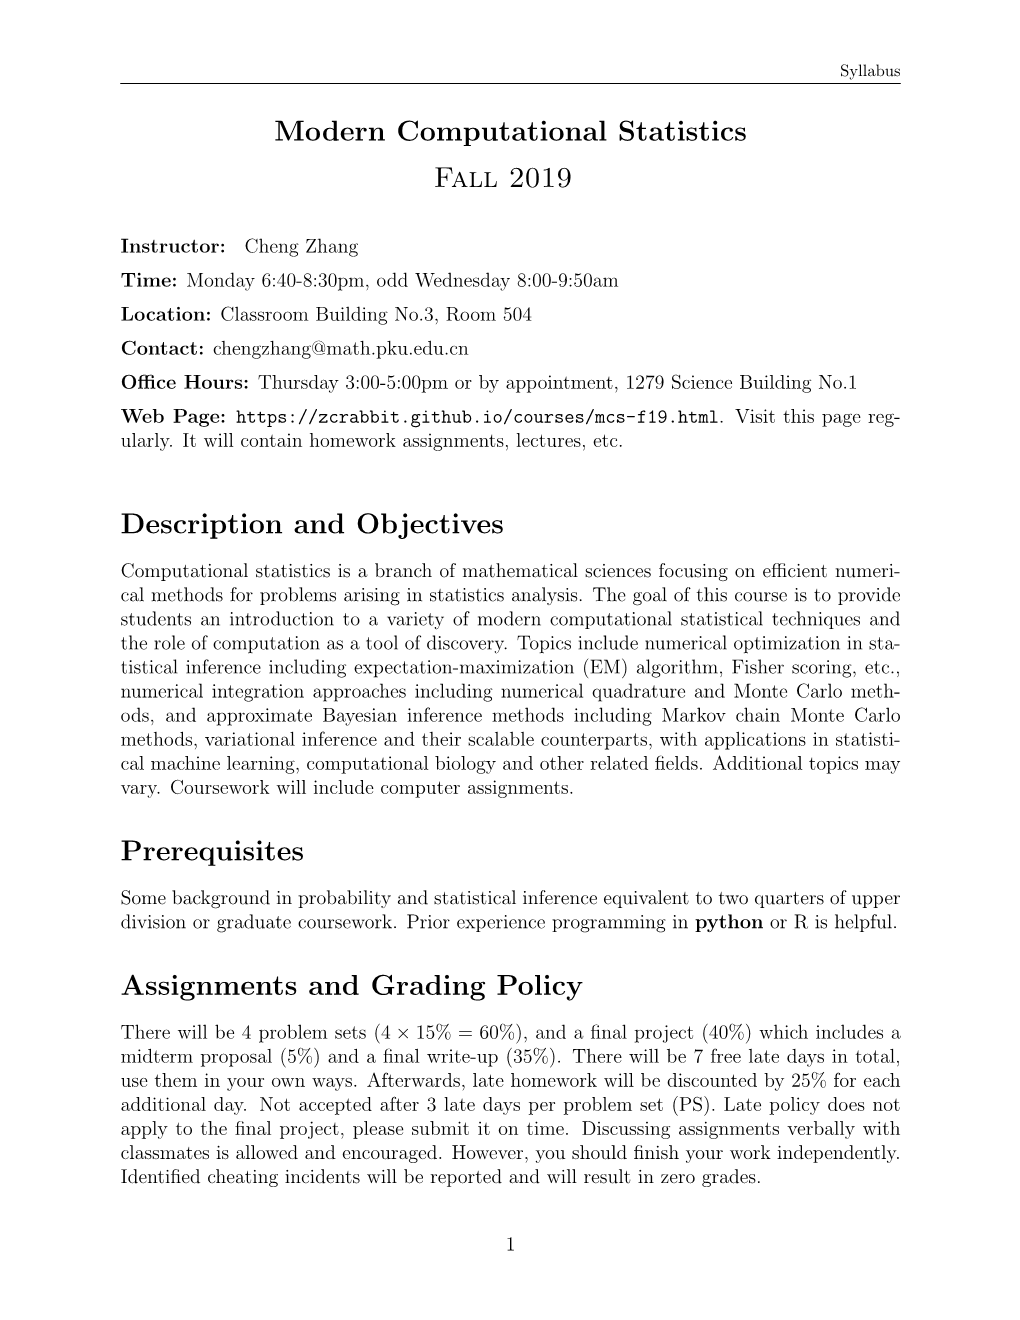 Modern Computational Statistics Fall 2019 Description and Objectives Prerequisites Assignments and Grading Policy